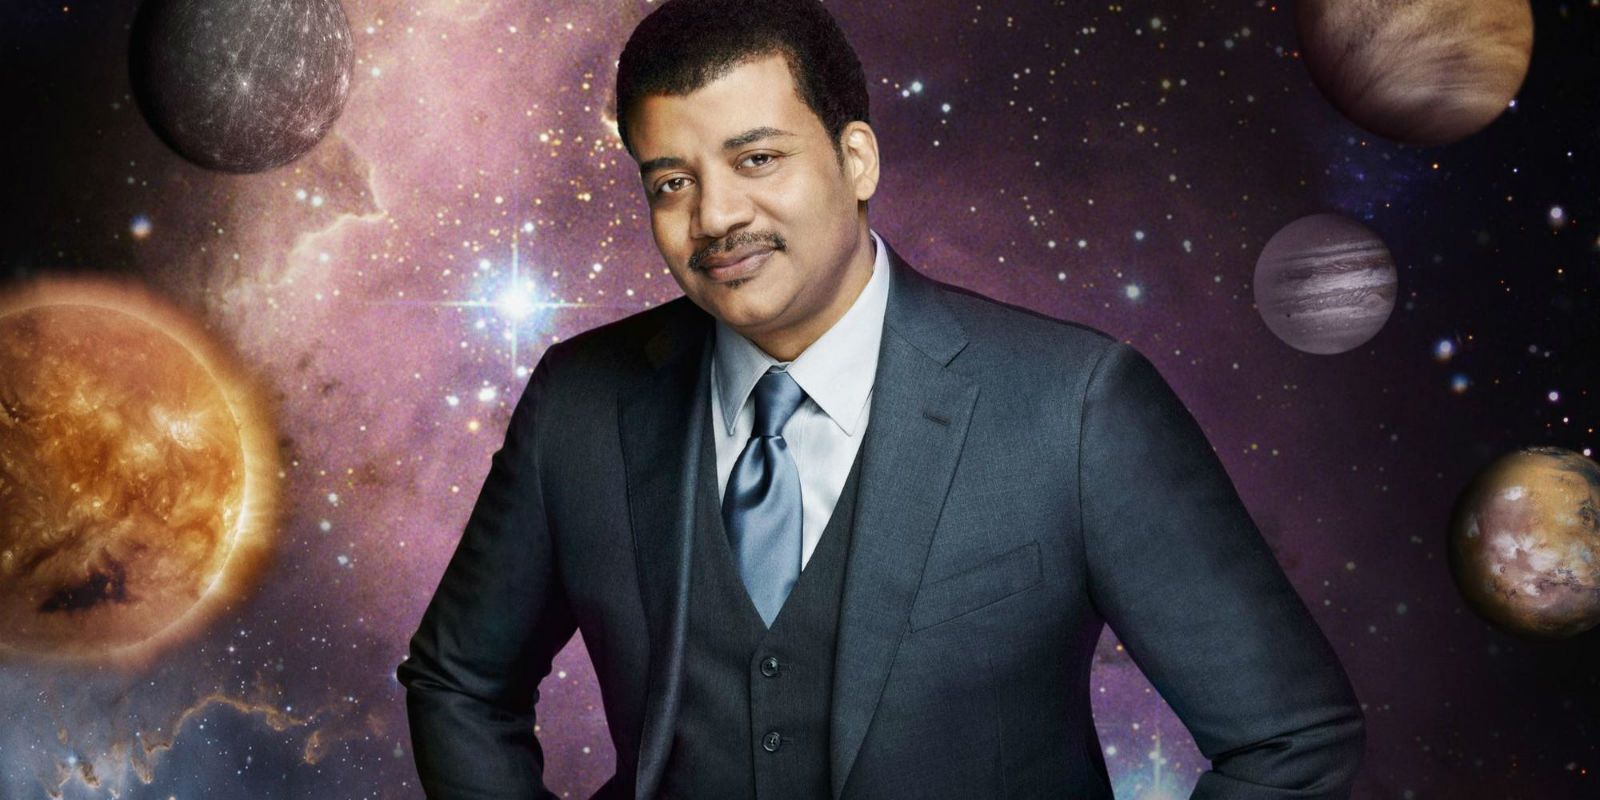 Neil DeGrasse Tyson standing with planets in the background in Cosmos